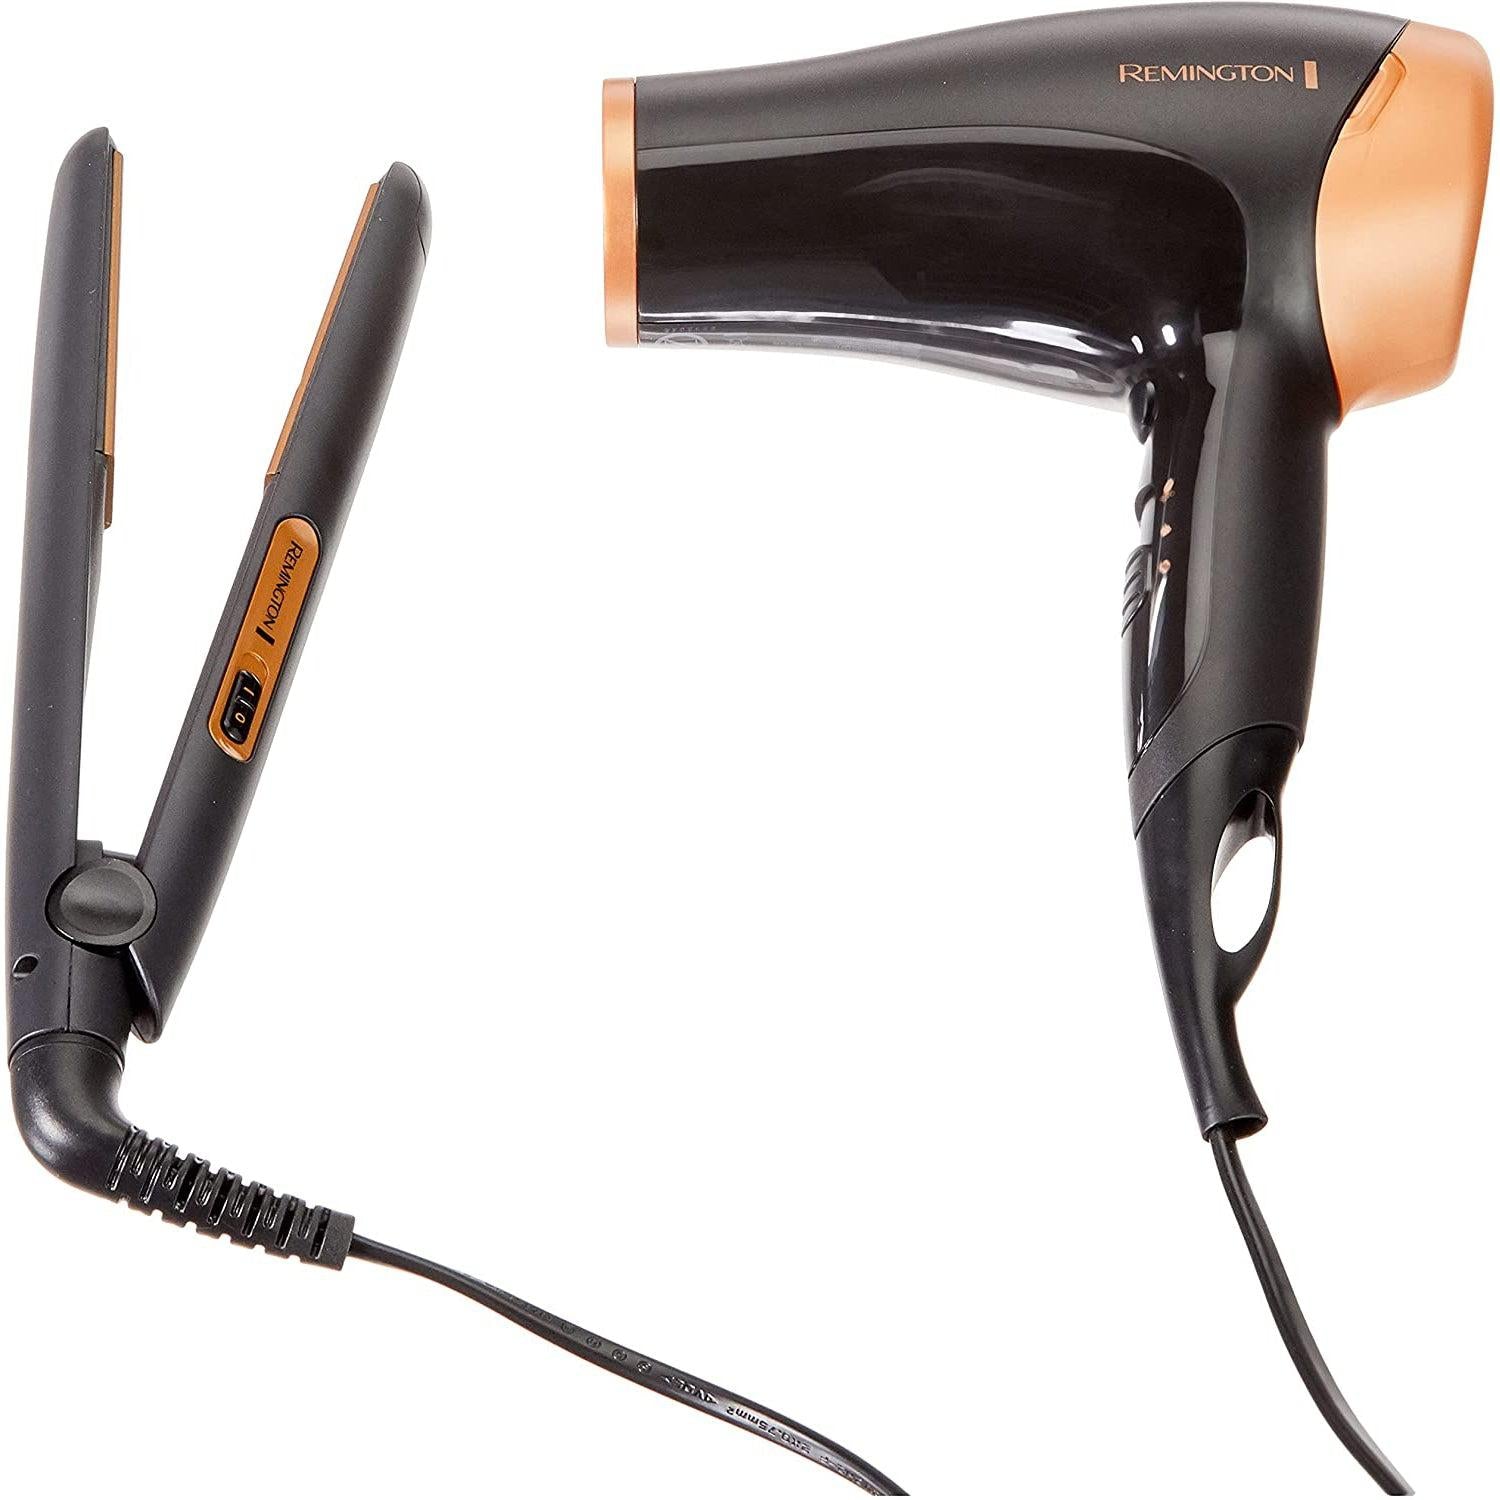 Remington Hair Care Gift Set - Ceramic Hair Straighteners and 2000 W Ionic Hair Dryer with Concentrator D3012GP